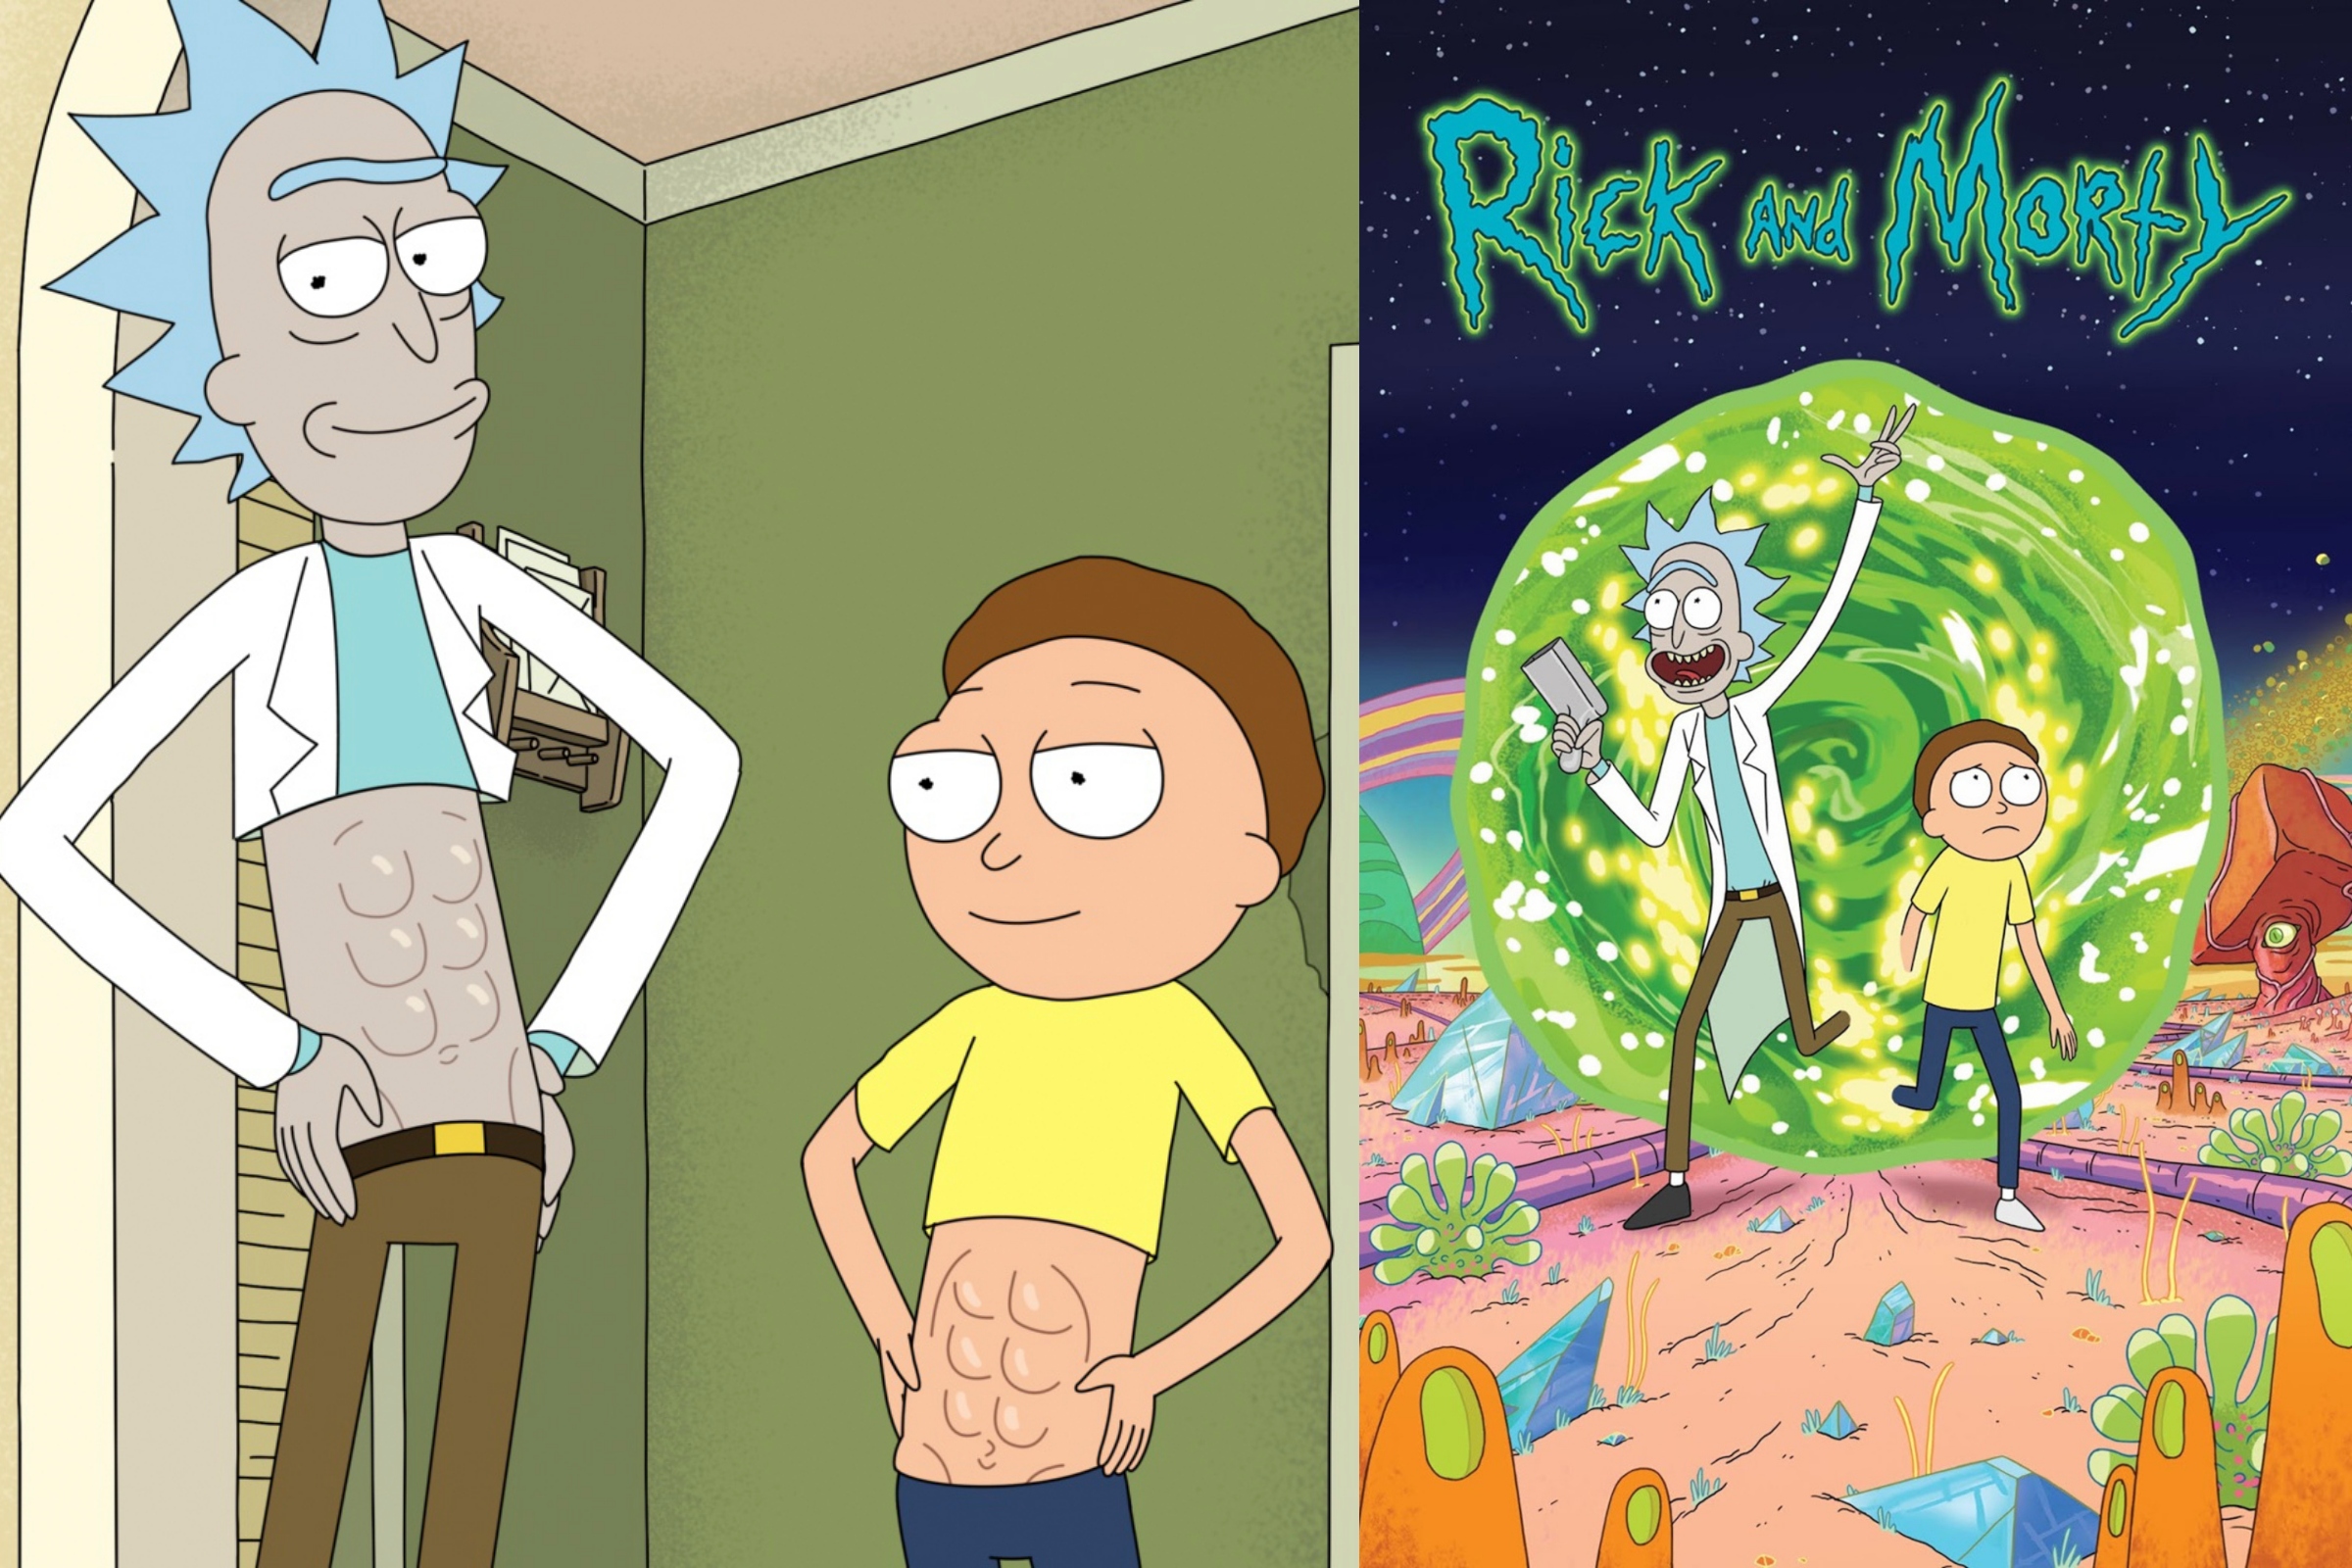 How would you rate Season 6 from a 1-10? : r/rickandmorty